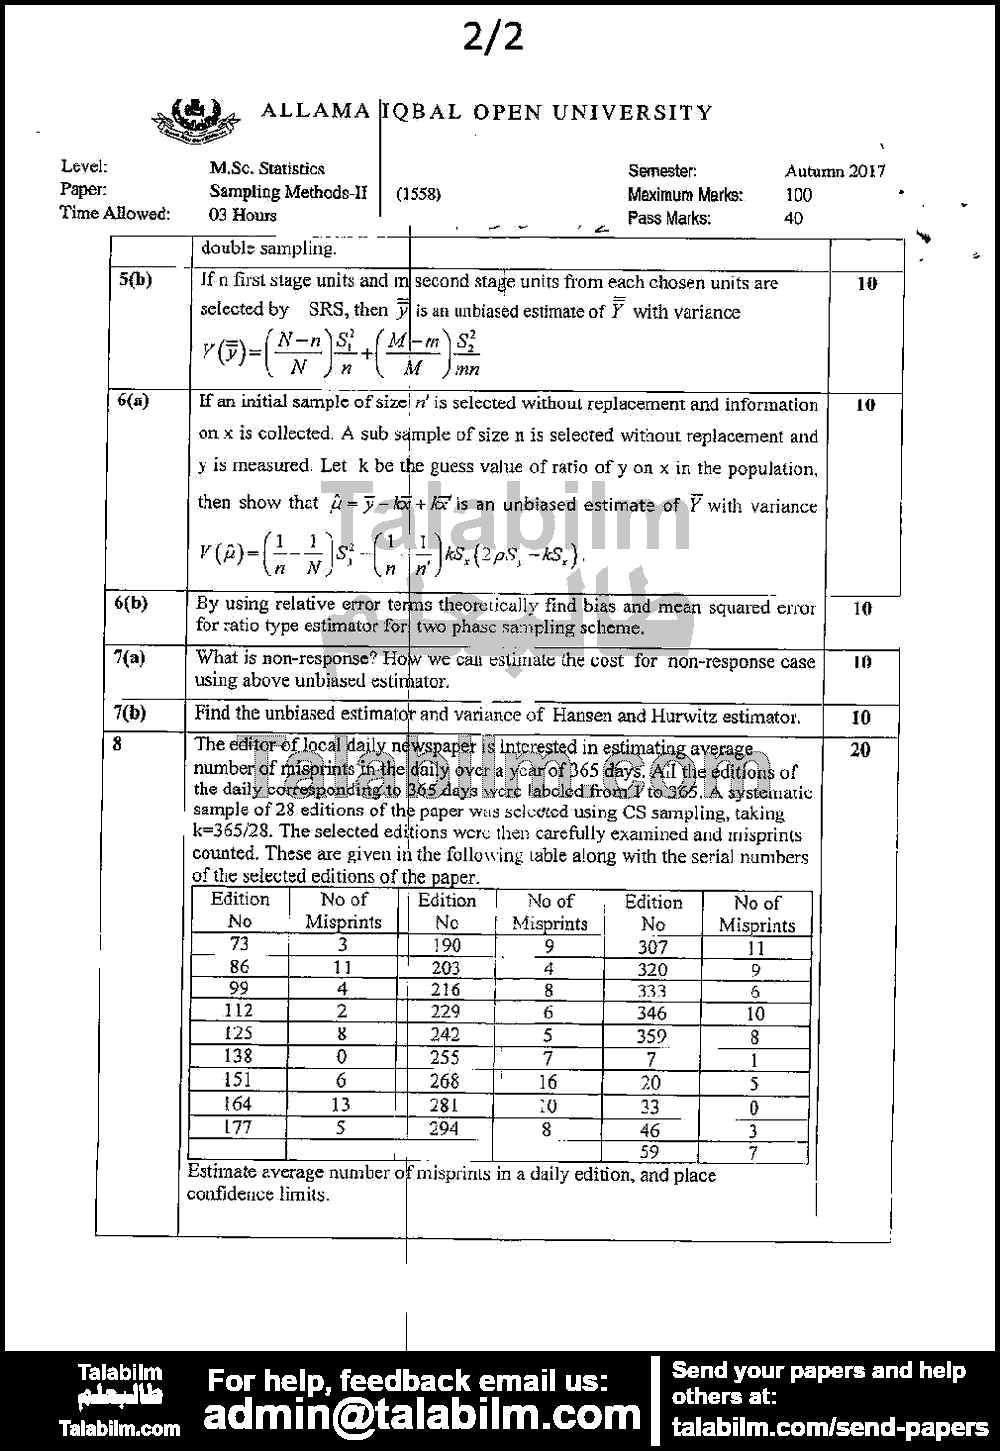 Sampling Techniques-II 1558 past paper for Autumn 2017 Page No. 2